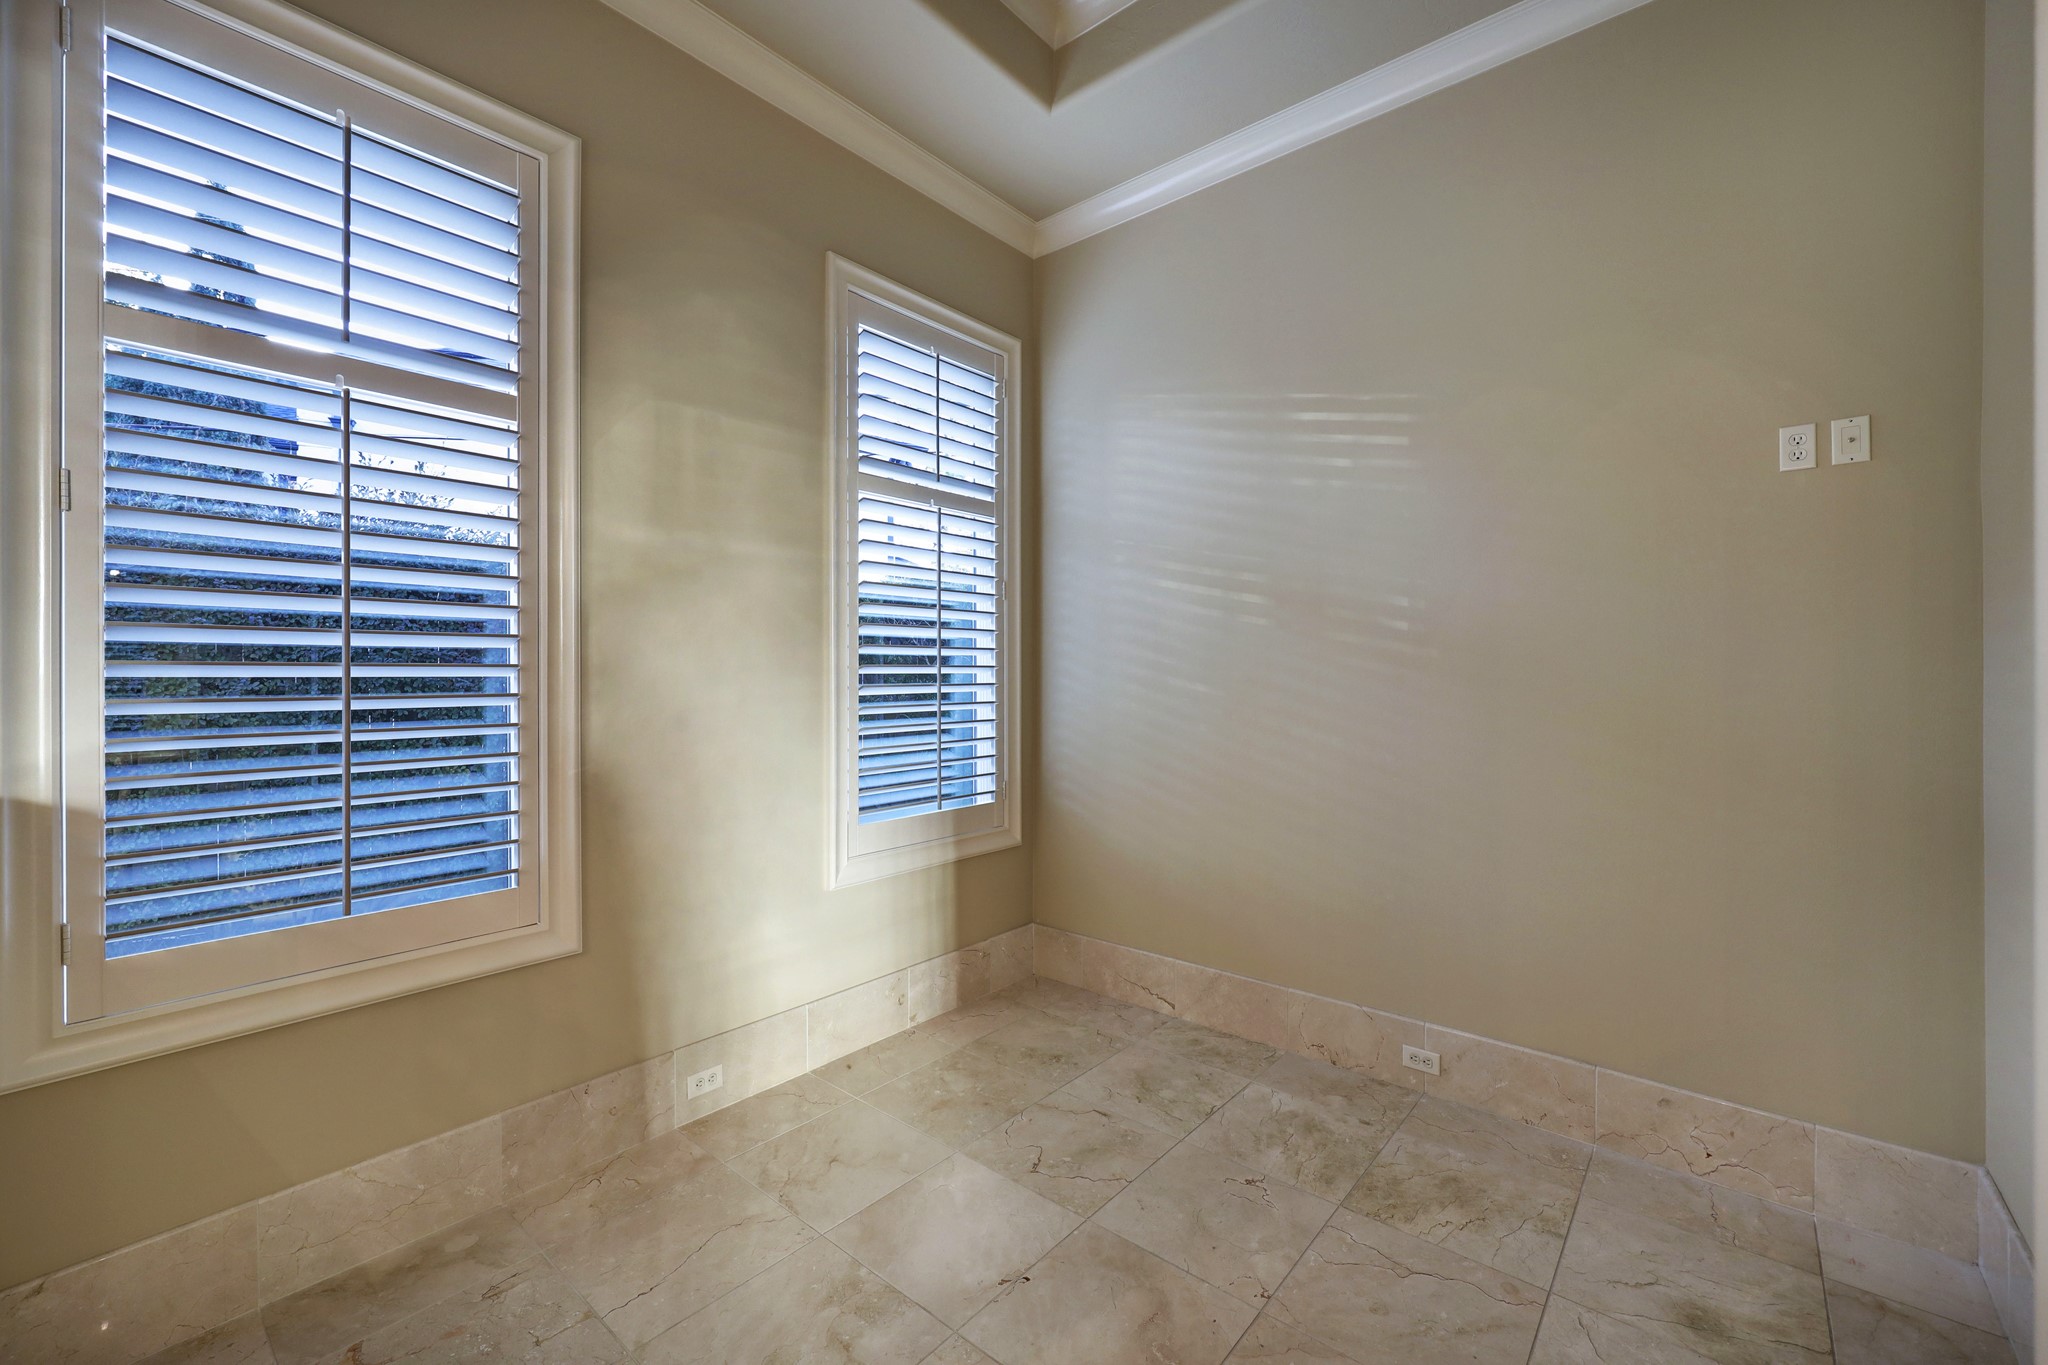 An entry vestibule with juice bar opens to the lavish owner's retreat, where you'll find a wall windows, high ceilings, and double crown molding accents.